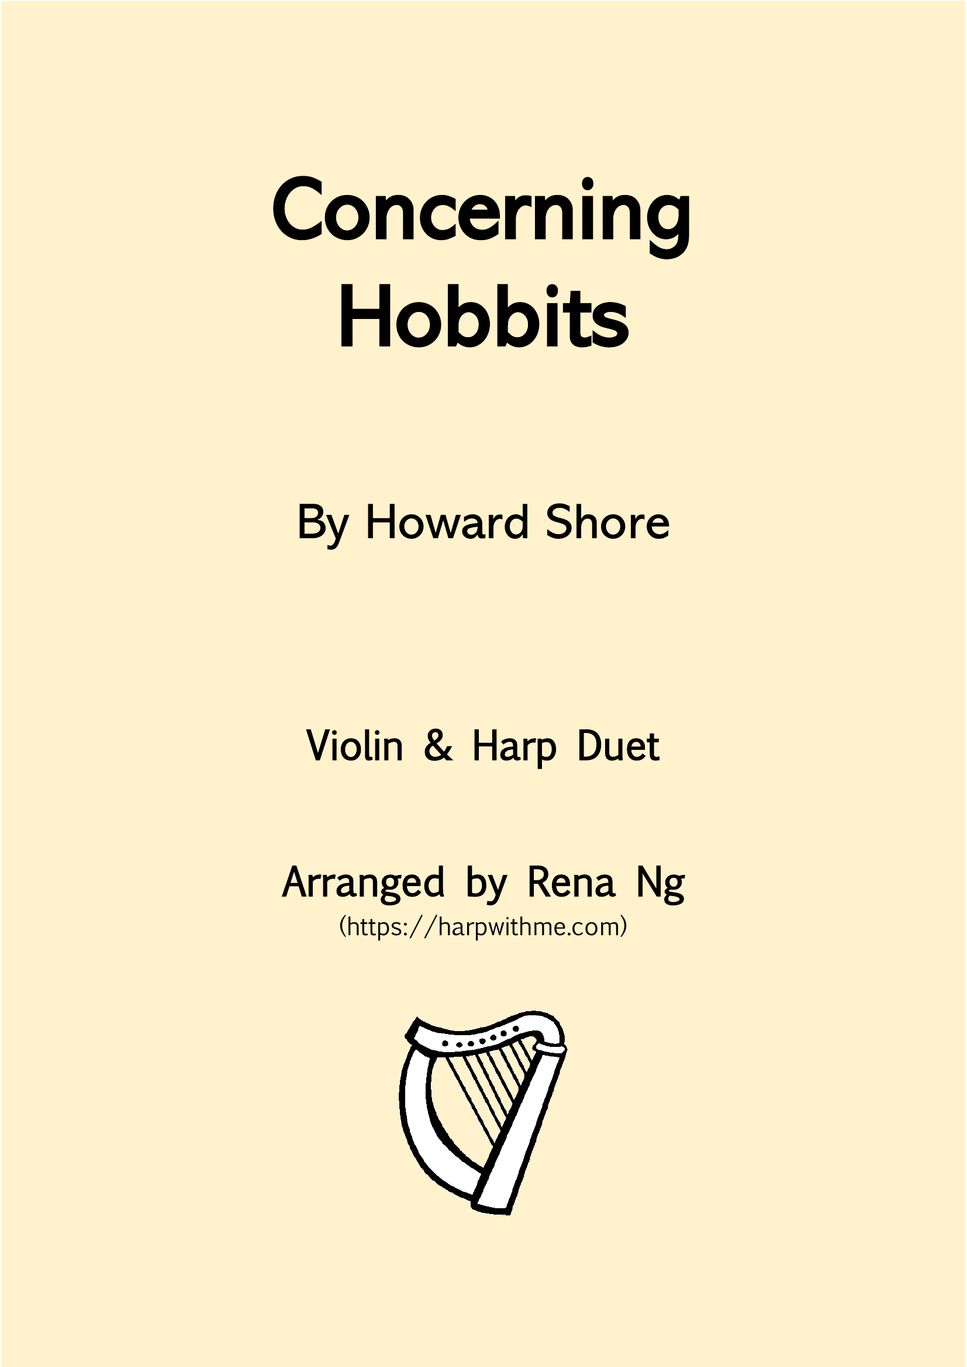 Howard Shore - Concerning Hobbits (Violin & Harp Duet) by Harp With Me